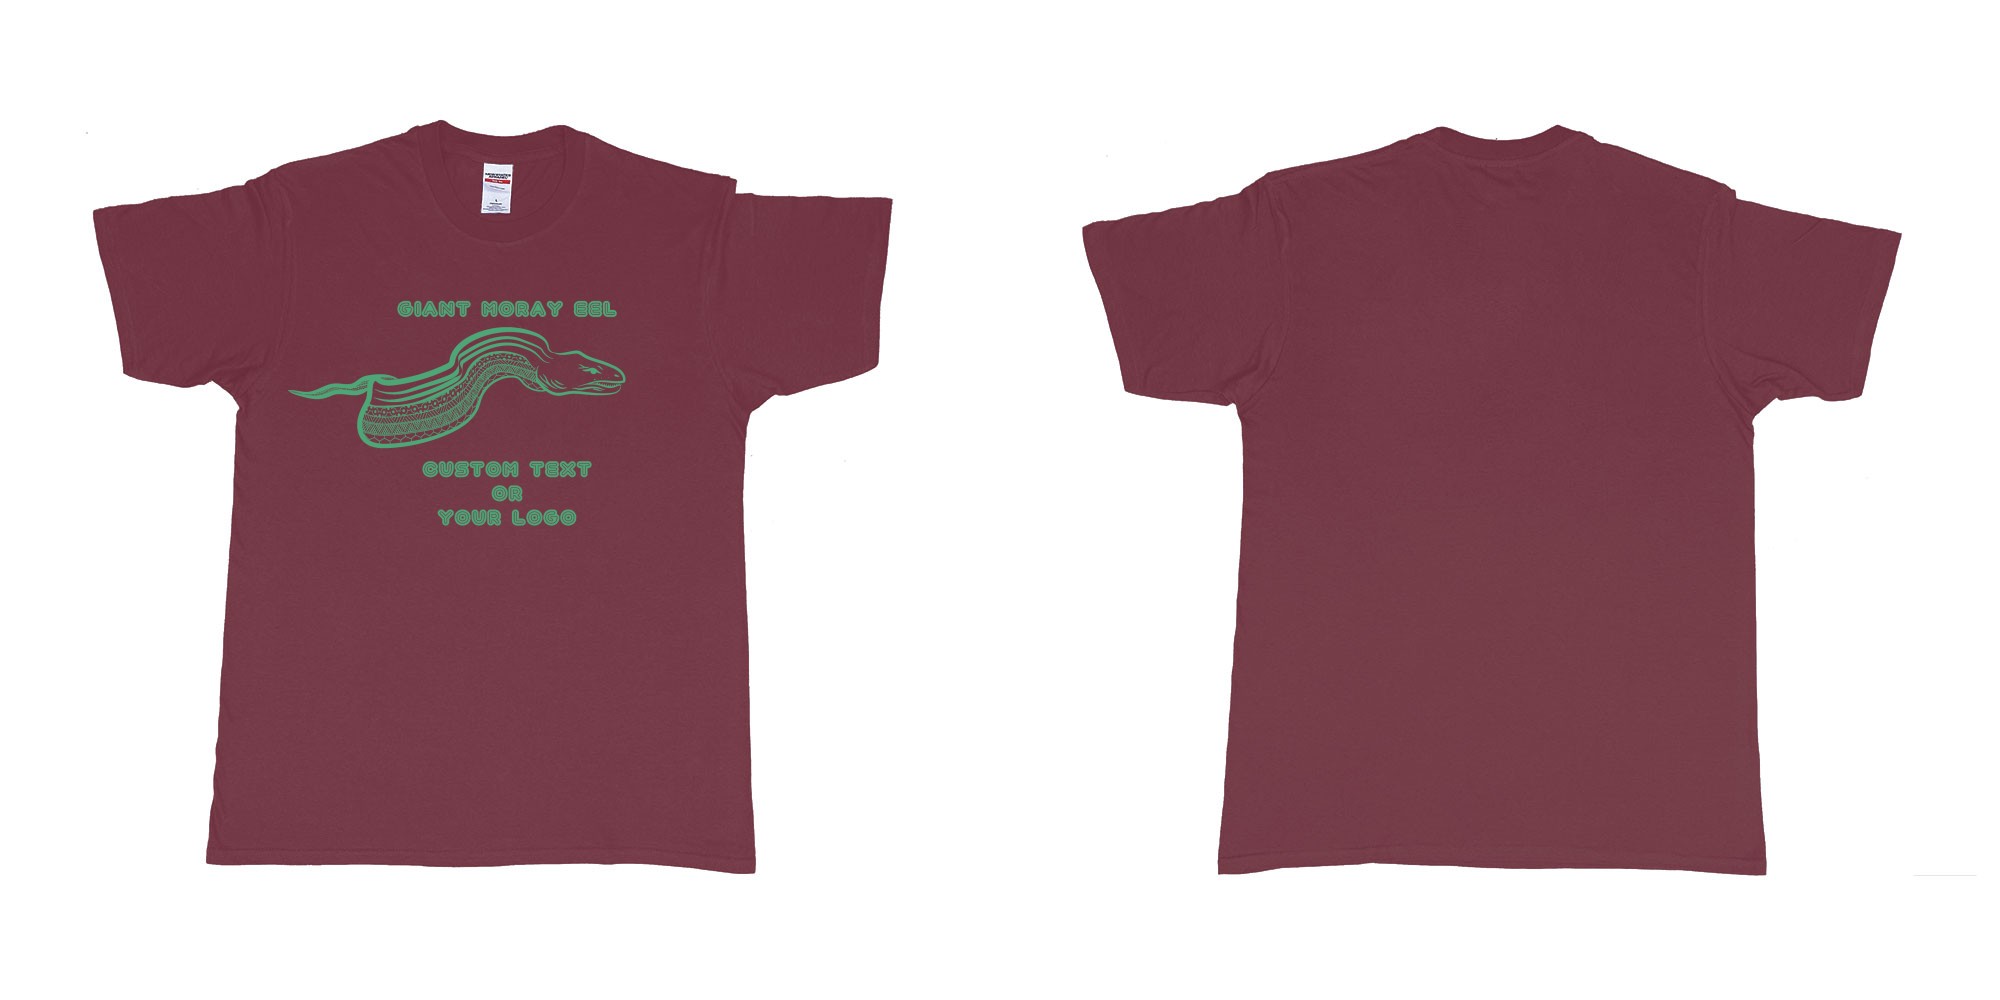 Custom tshirt design giant moray eel tribal in fabric color marron choice your own text made in Bali by The Pirate Way